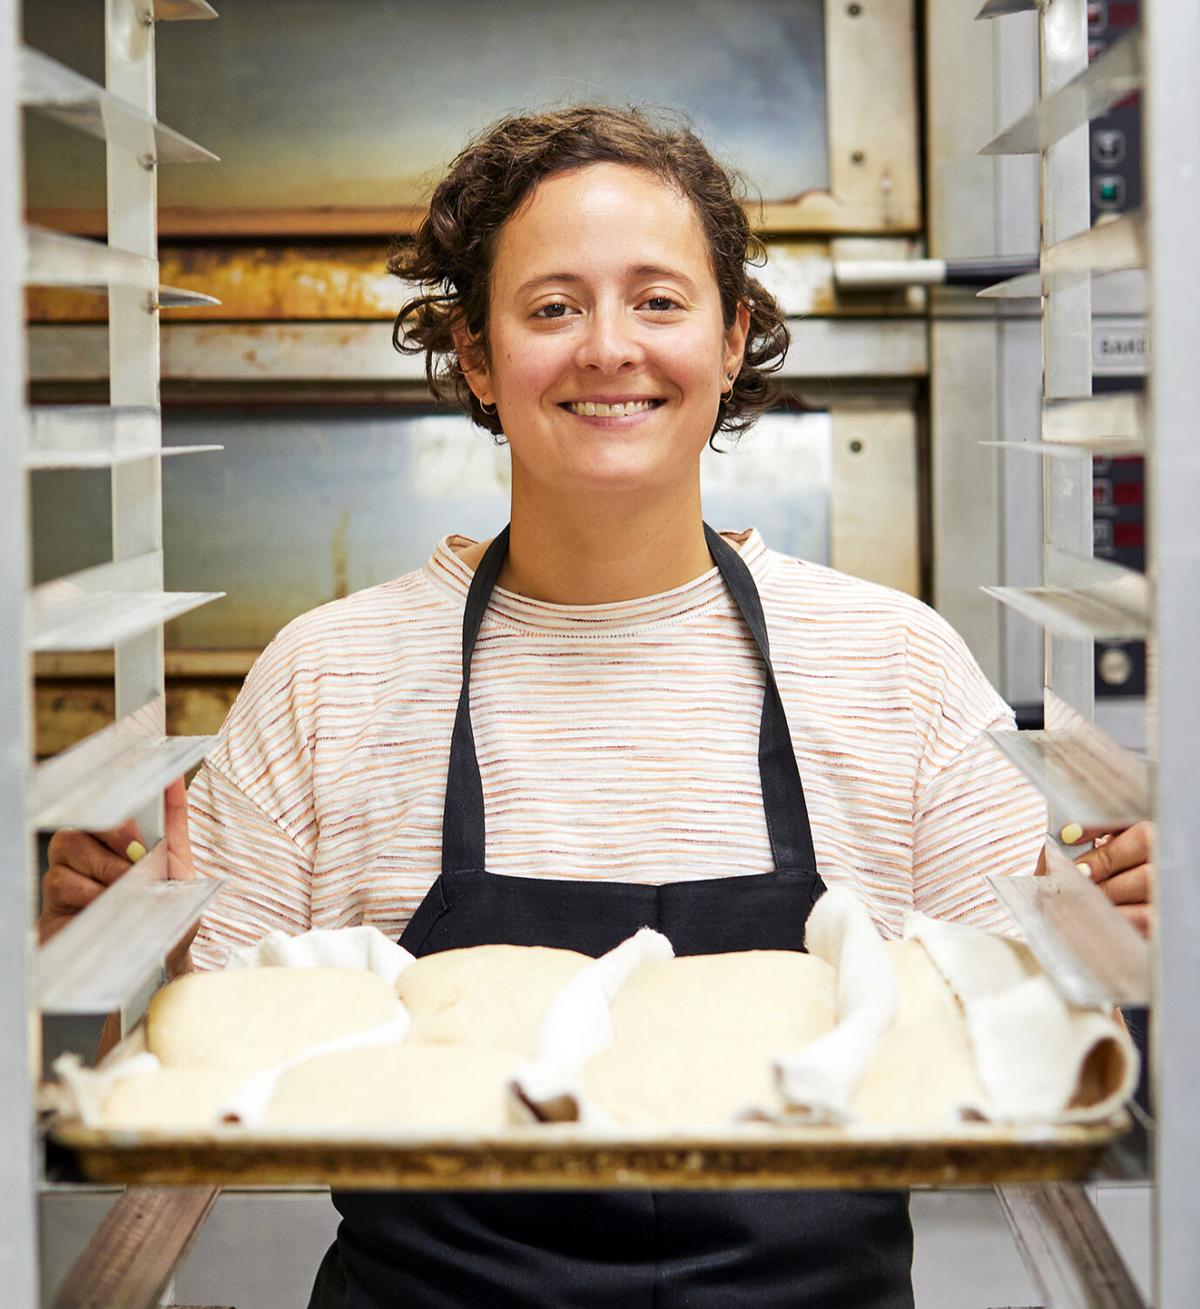 7 Female Pastry Chefs We Adore - Women Chefs